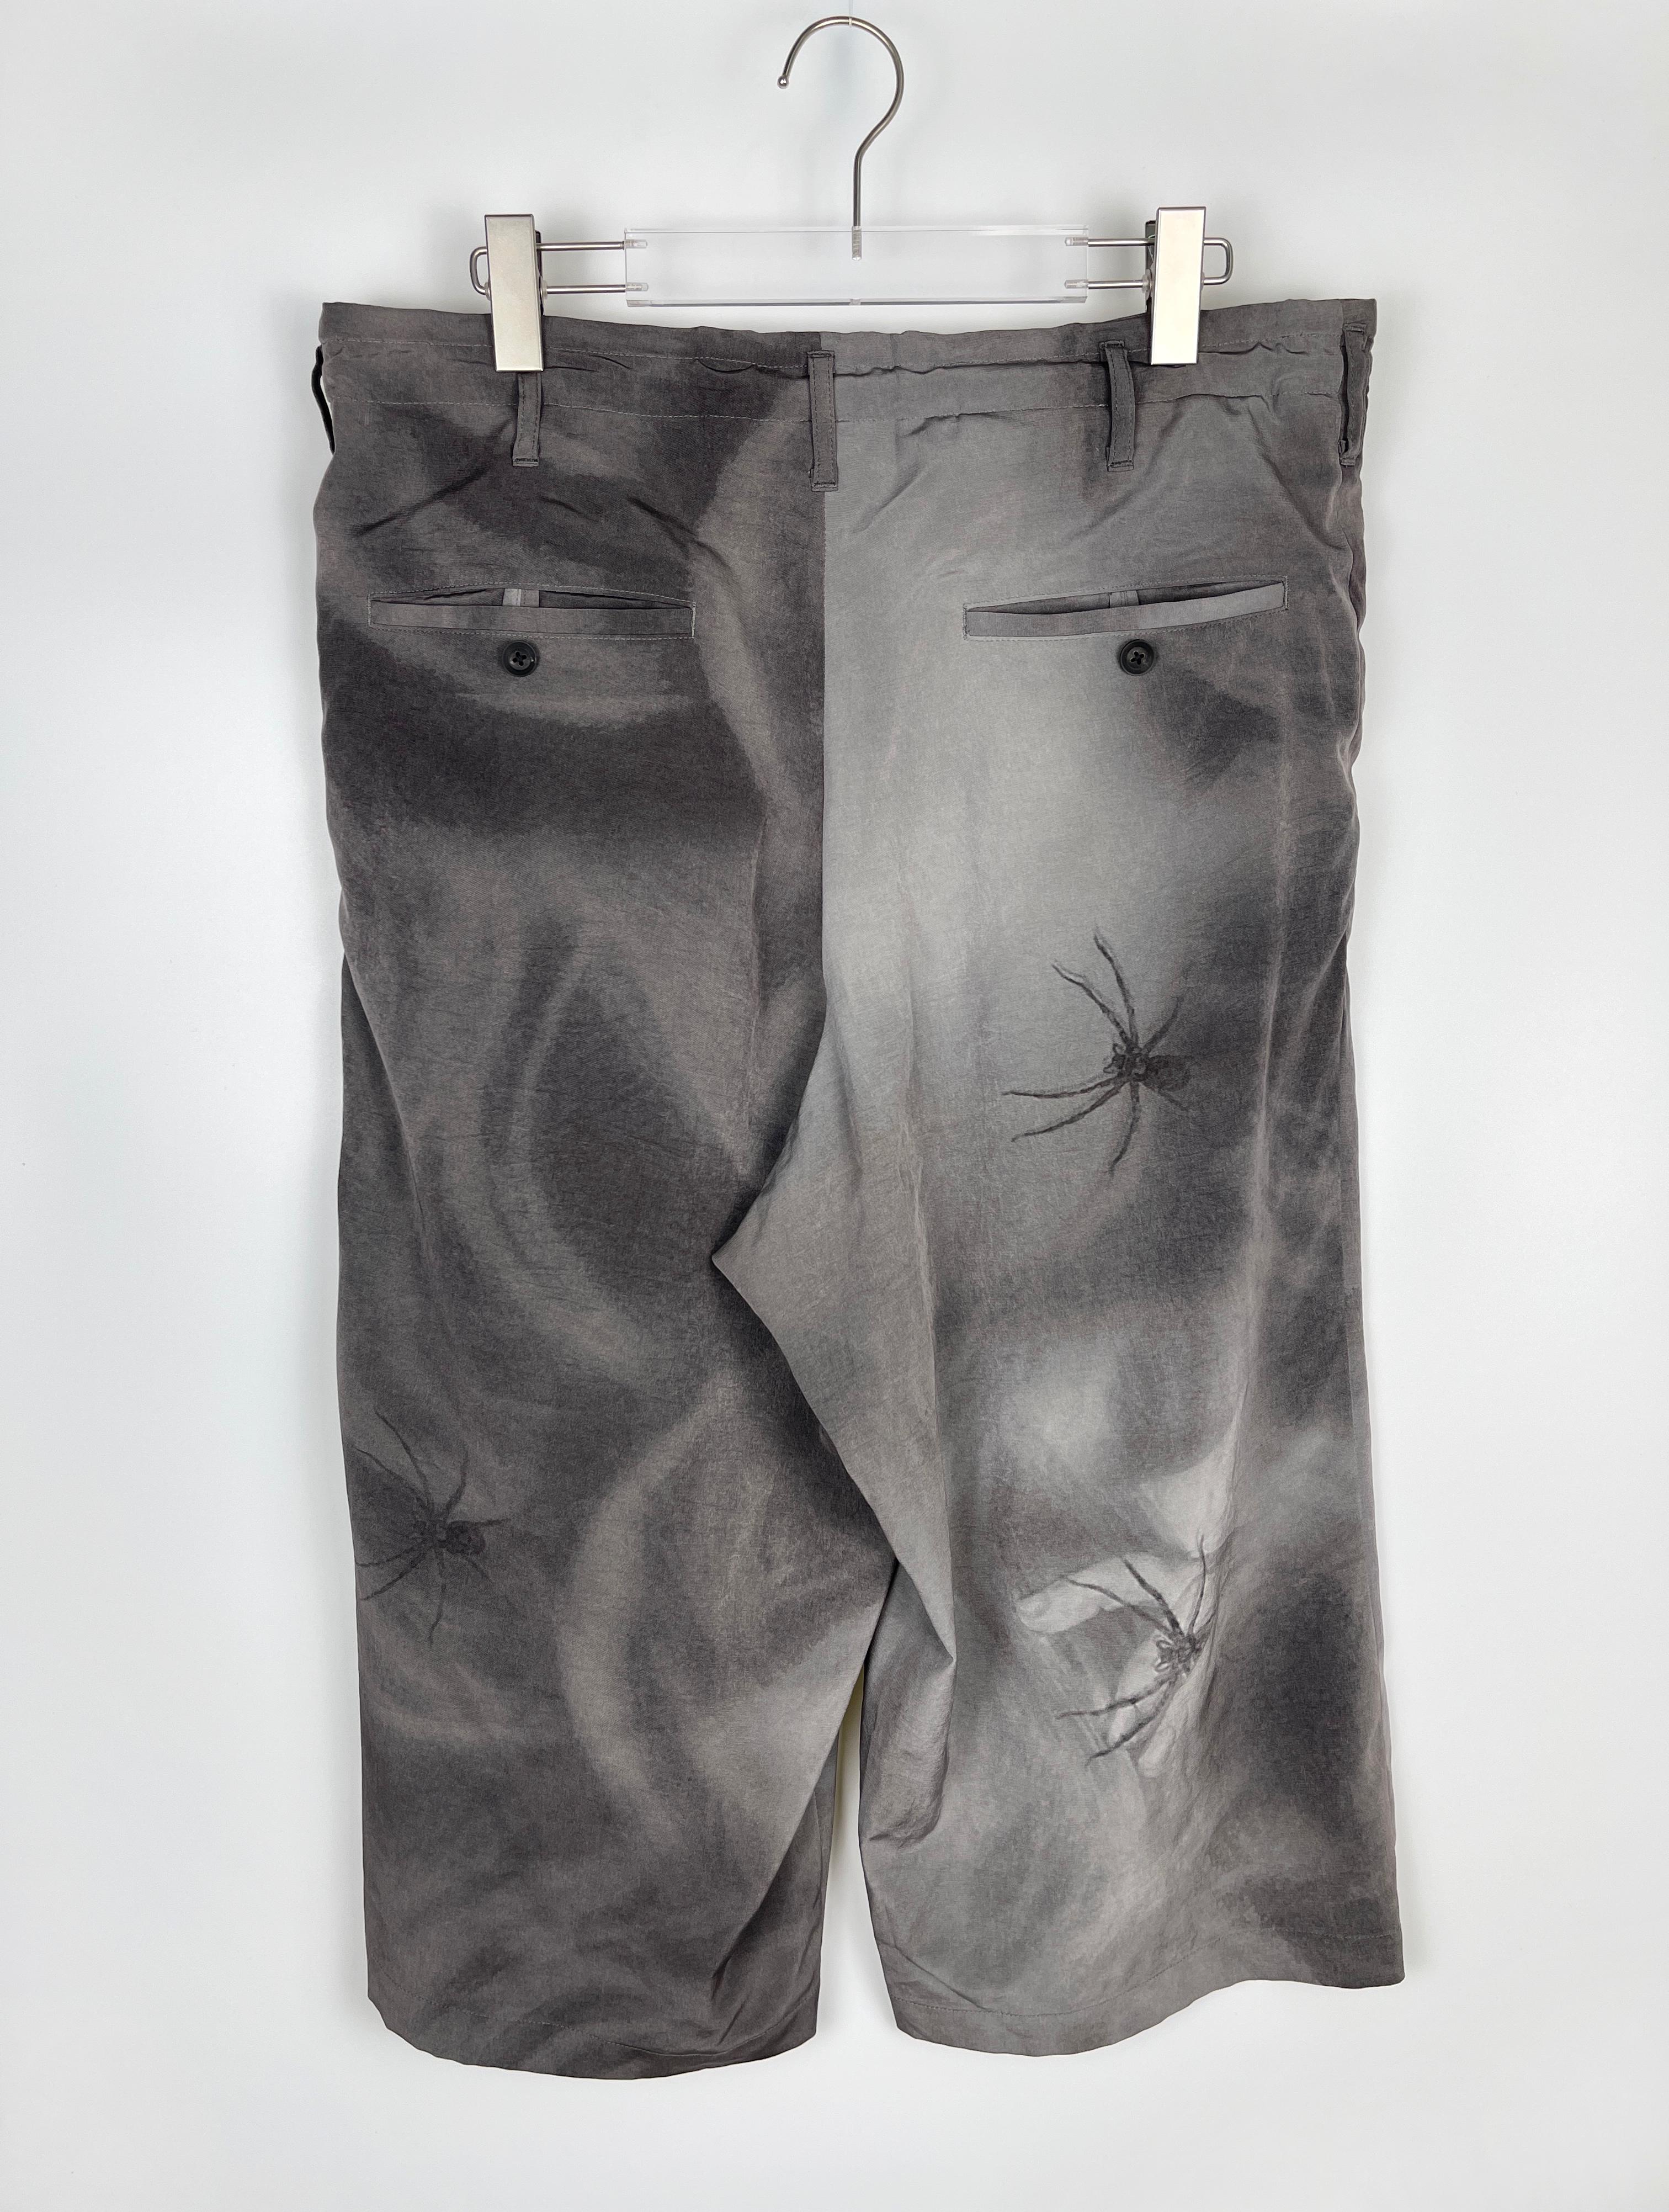 Yohji Yamamoto Pour Homme S/S20 Suzume Uchida Spider Shorts In Excellent Condition For Sale In Tương Mai Ward, Hoang Mai District